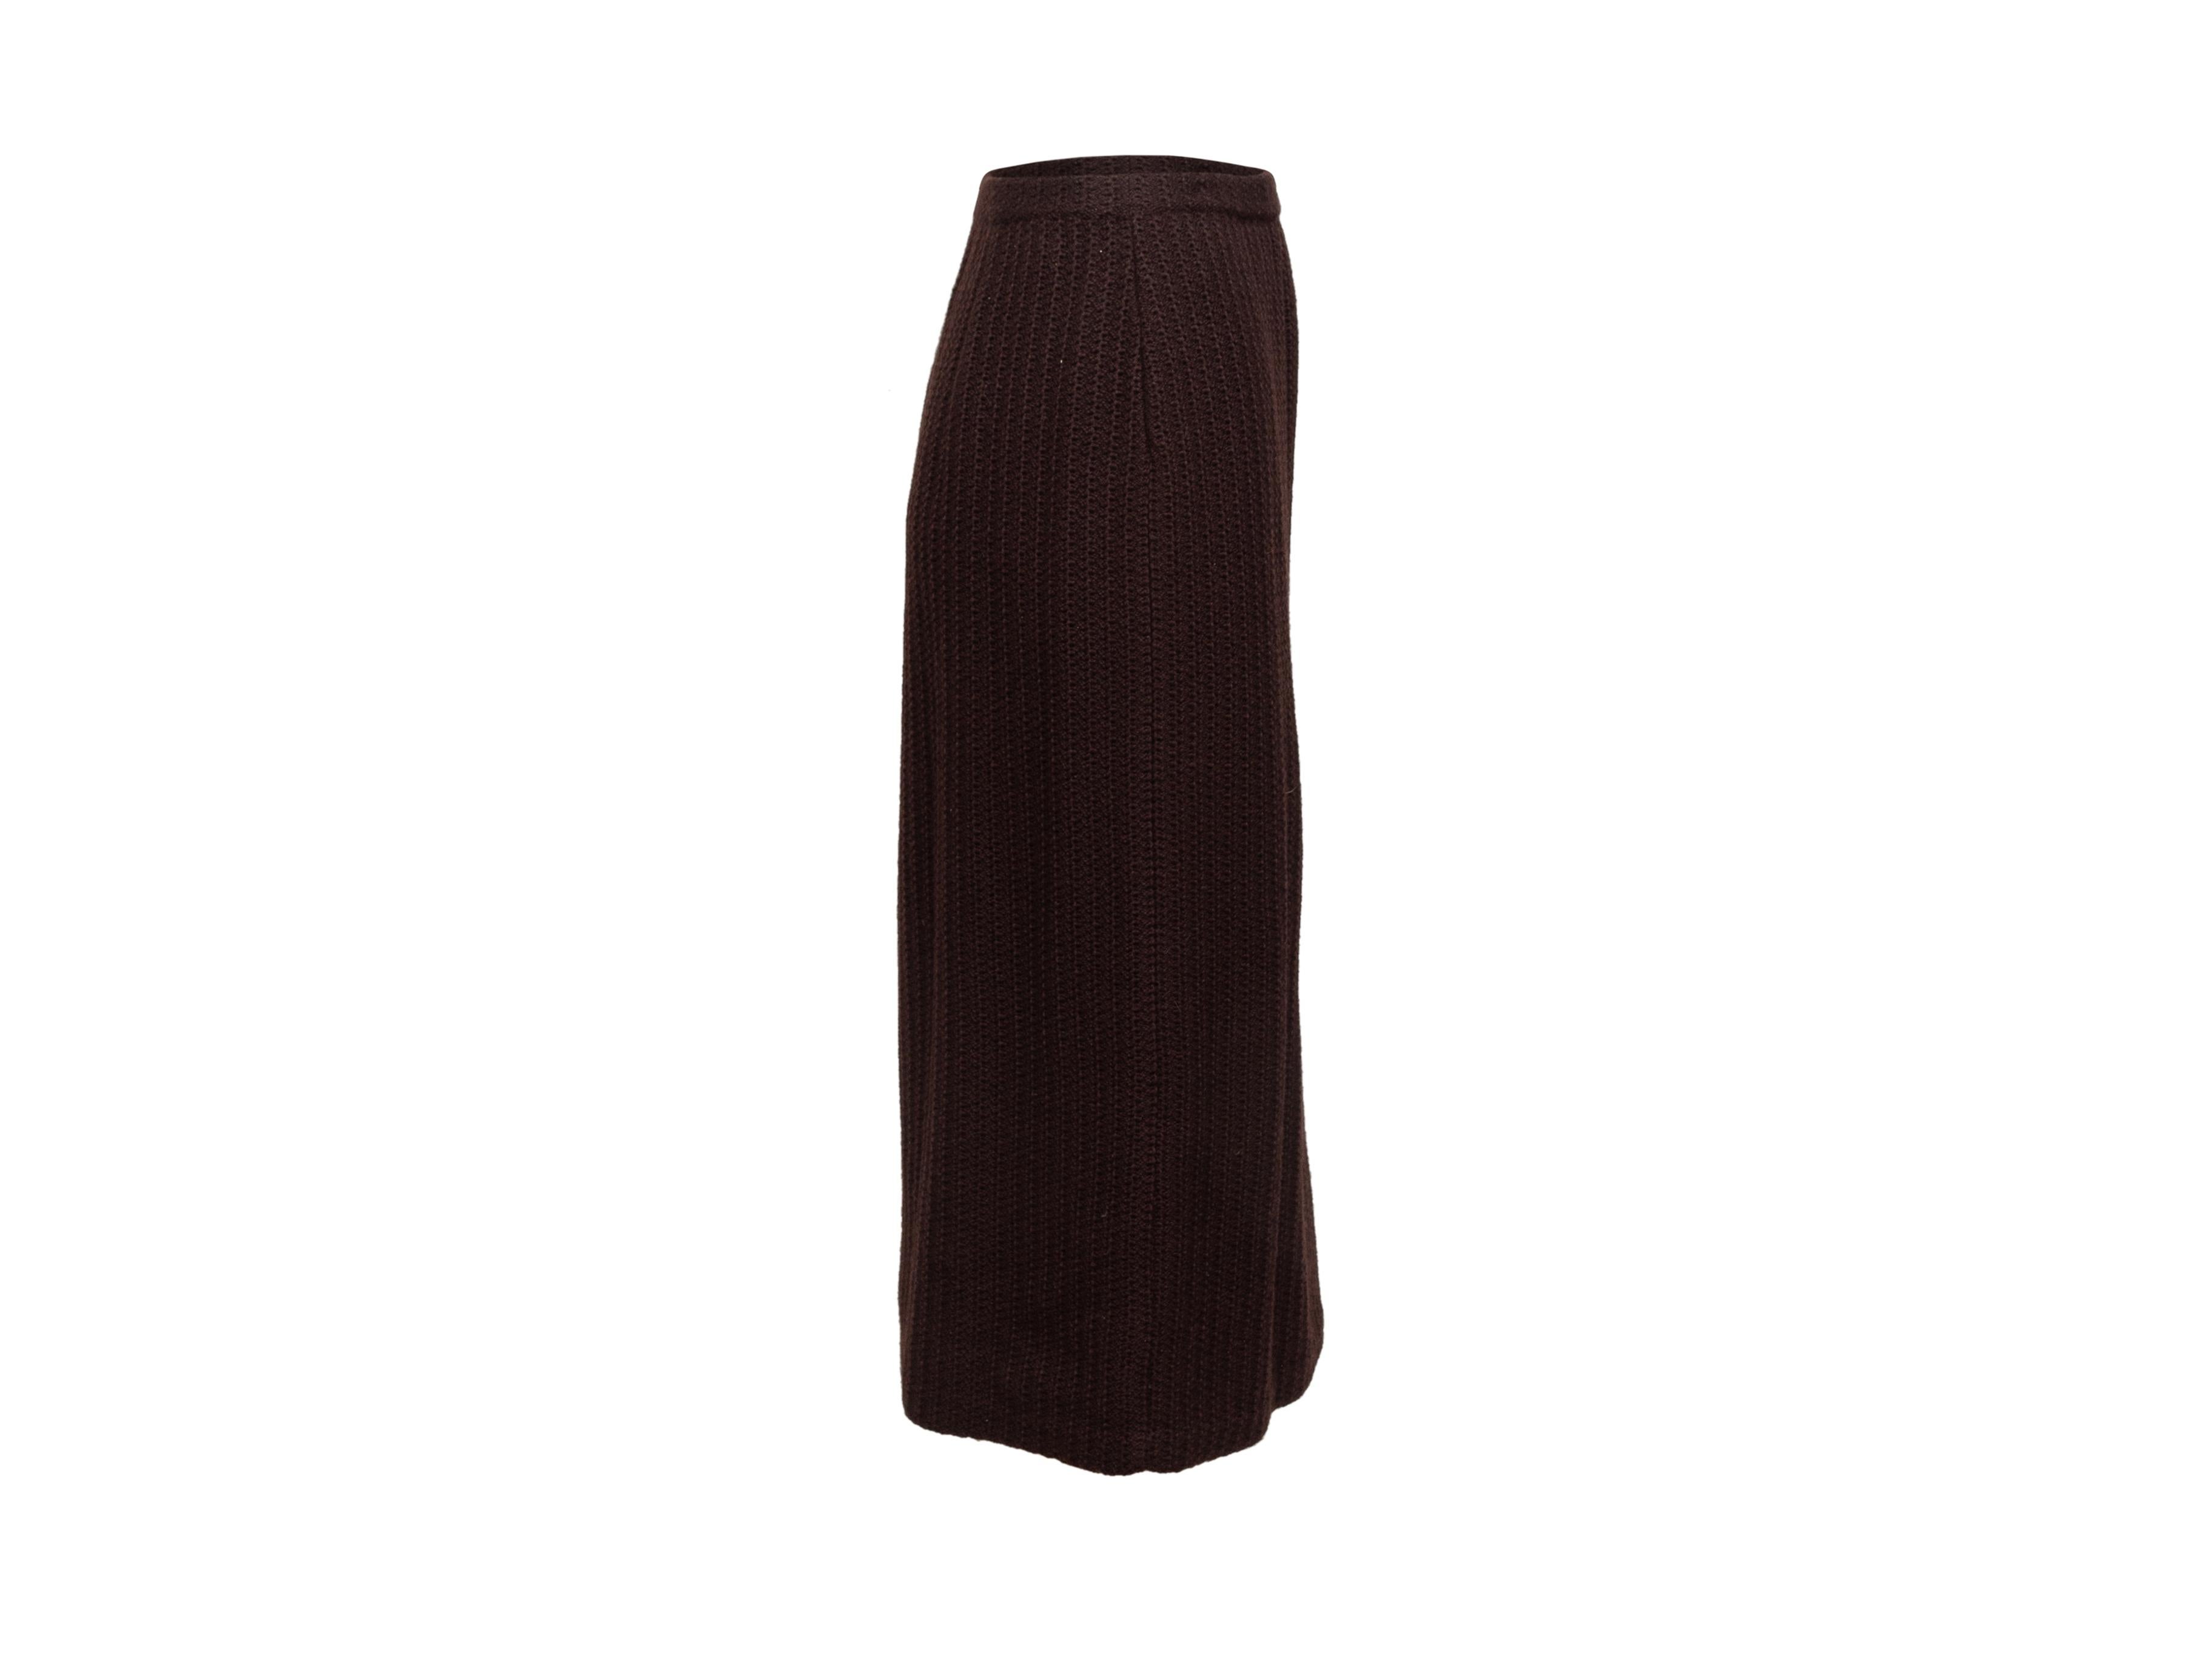 Product details: Vintage brown wool knit skirt by Chanel. Designer size 40. 24